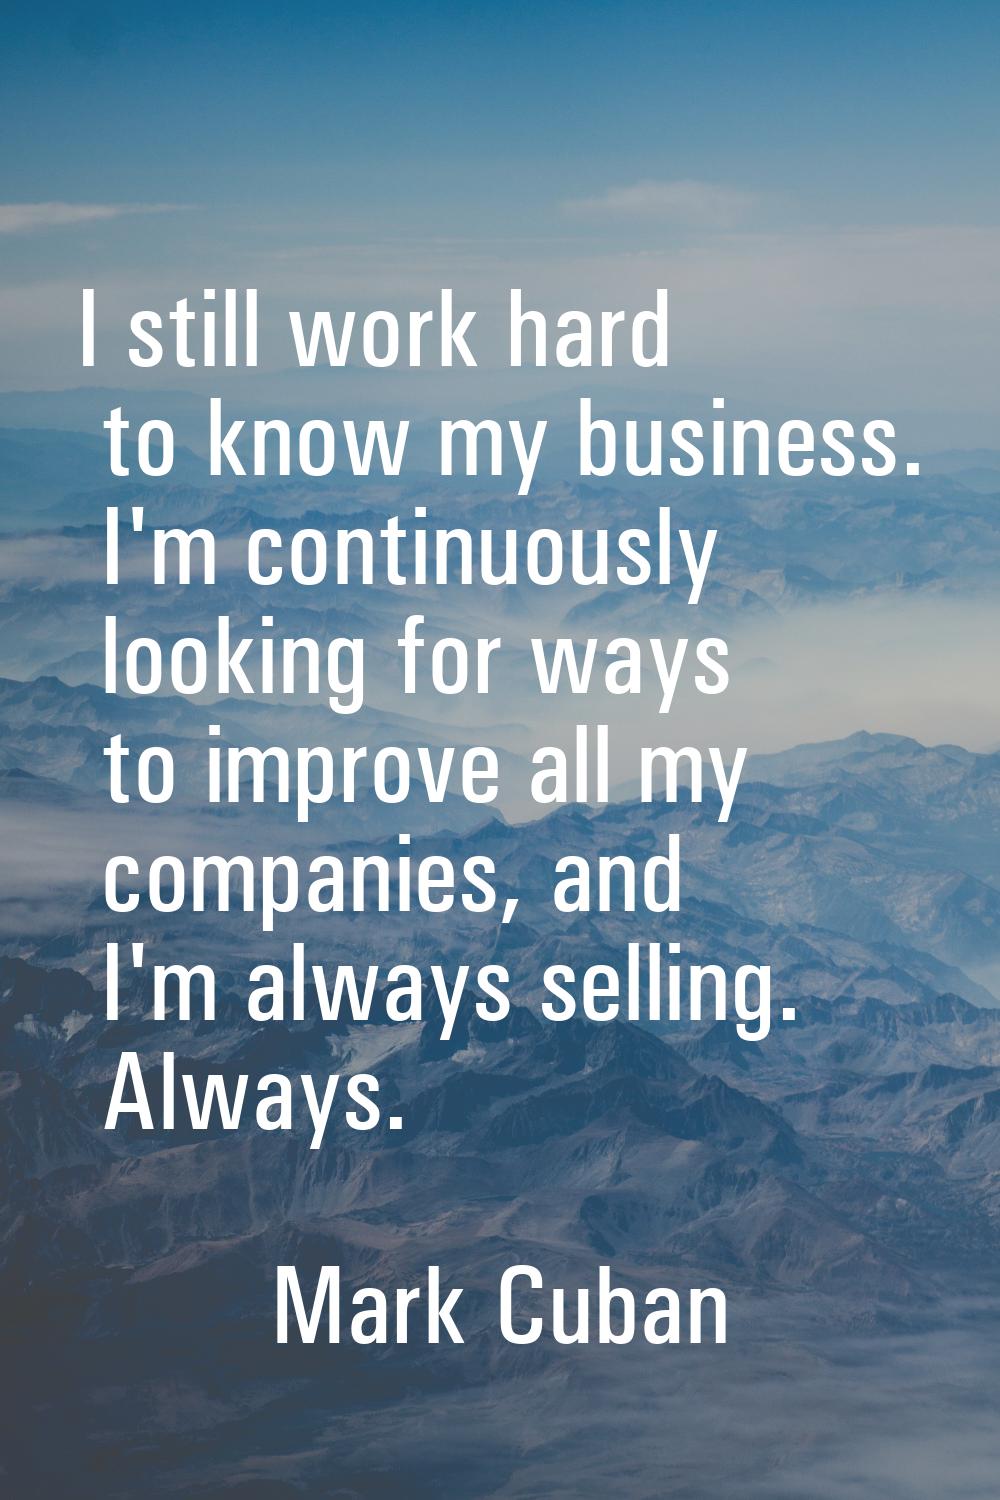 I still work hard to know my business. I'm continuously looking for ways to improve all my companie